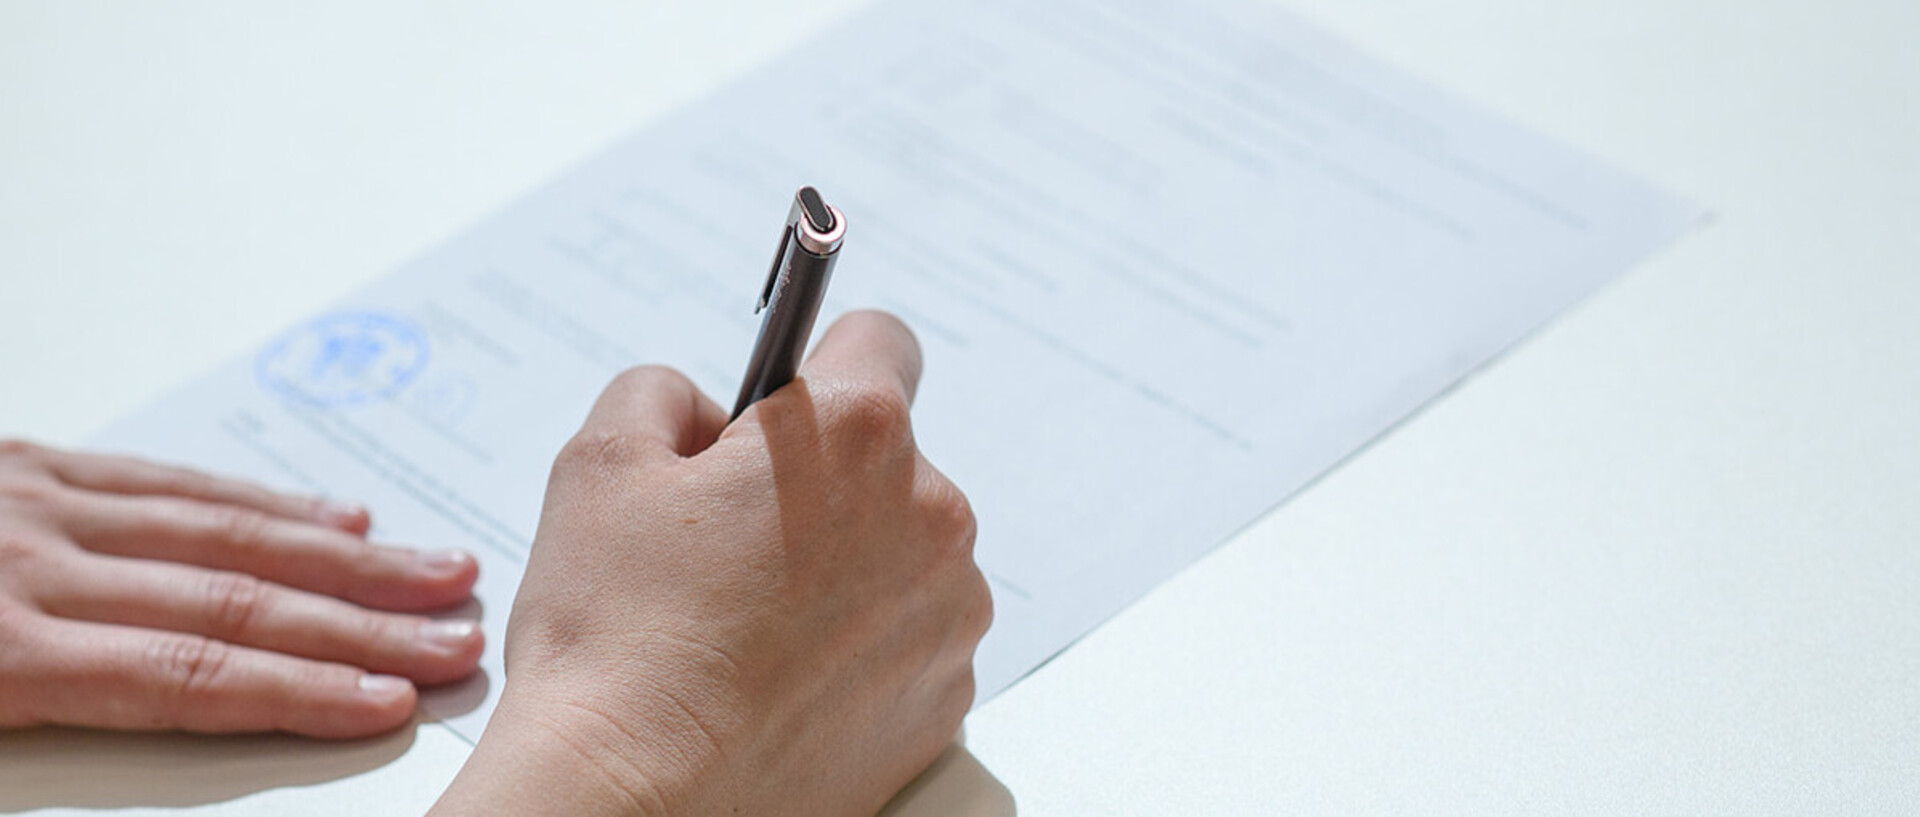 A person is filling out a paper form with a pen.